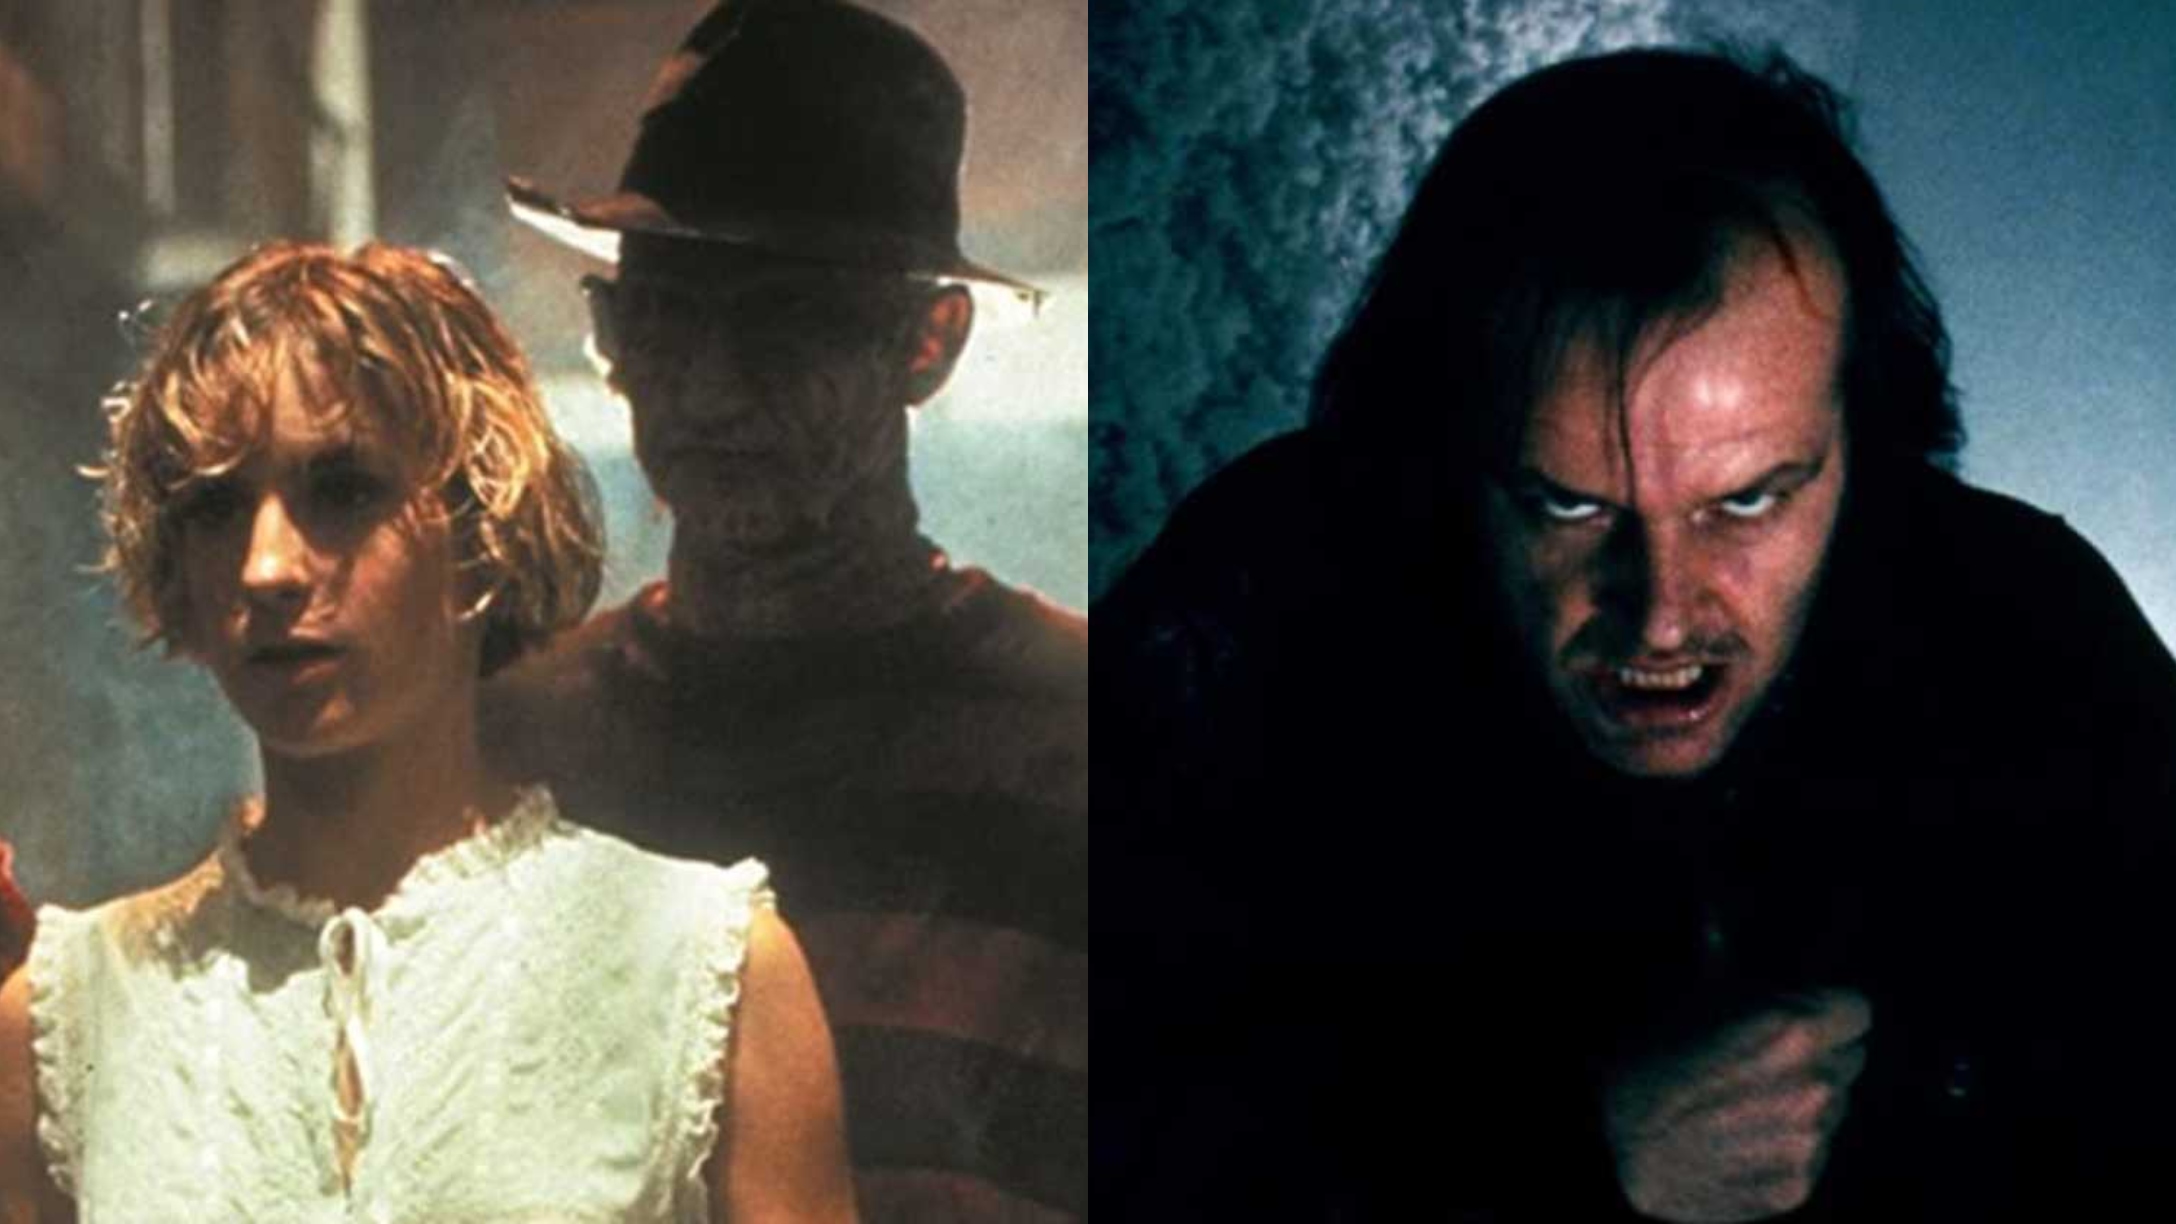 Every Horror Movie of 2022 Ranked Best to Worst